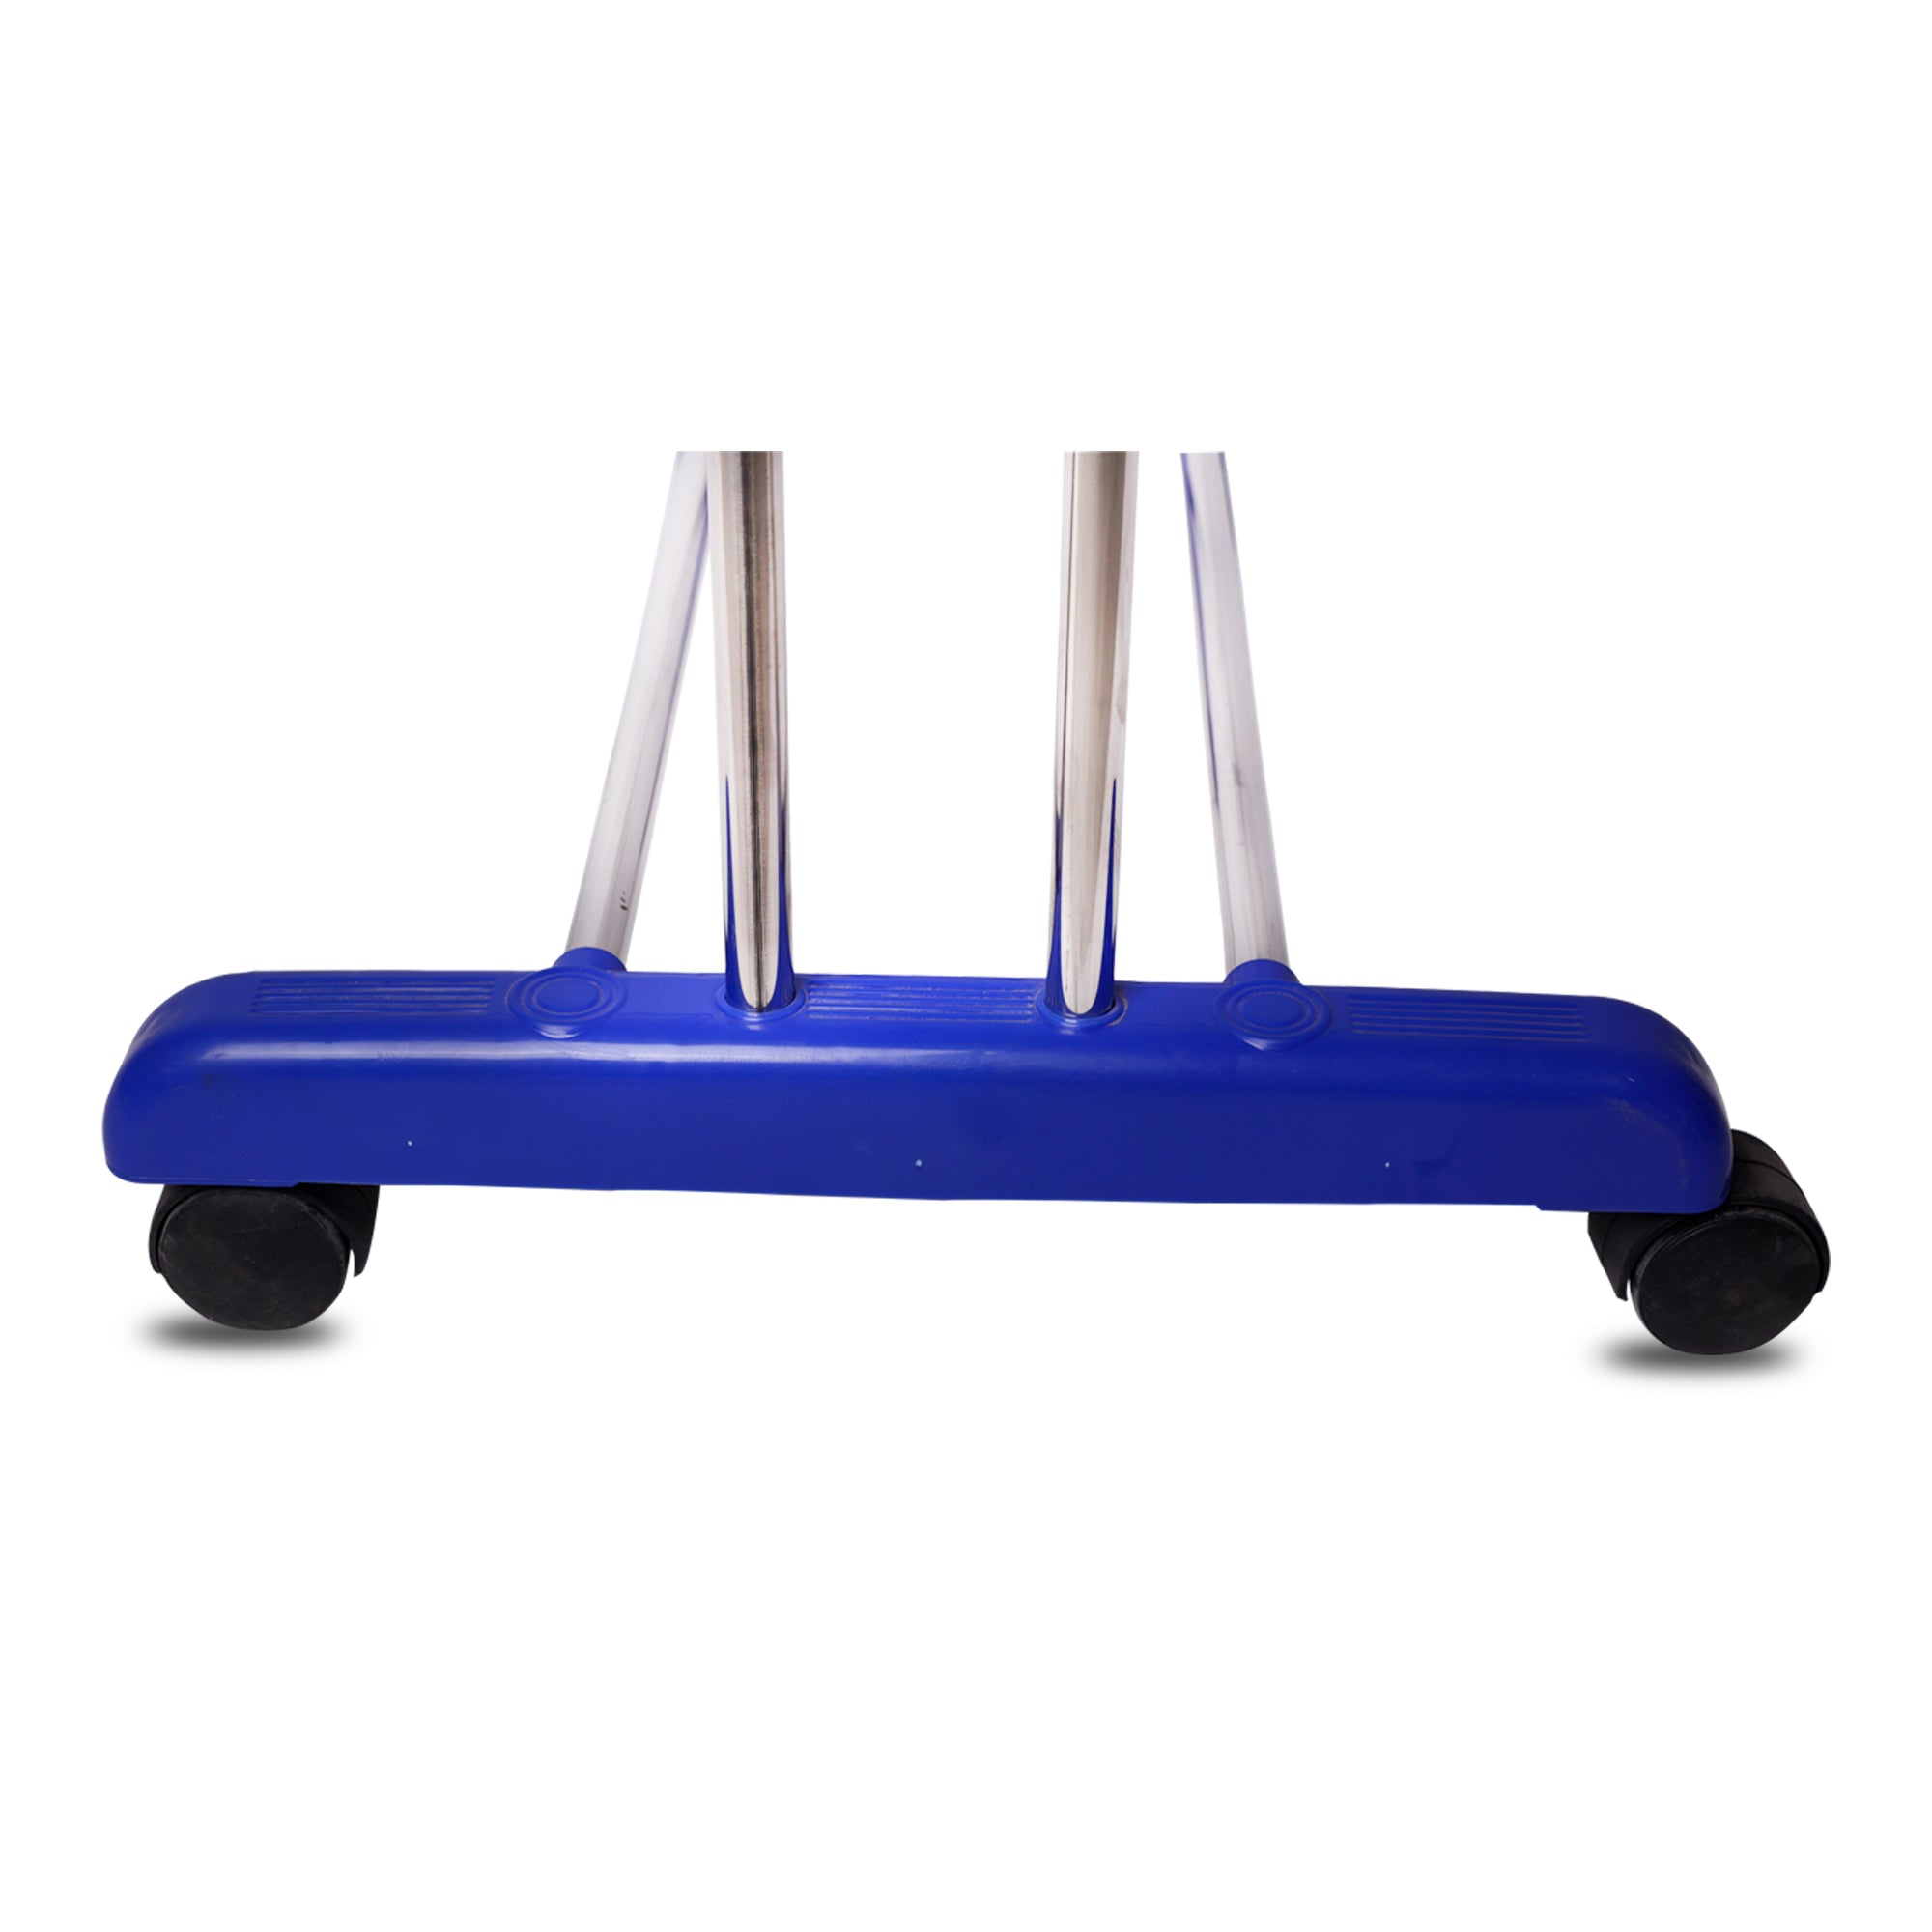 Stainless Steel Cloth Drying Stand I 3-Tier Stainless Steel I (Blue)